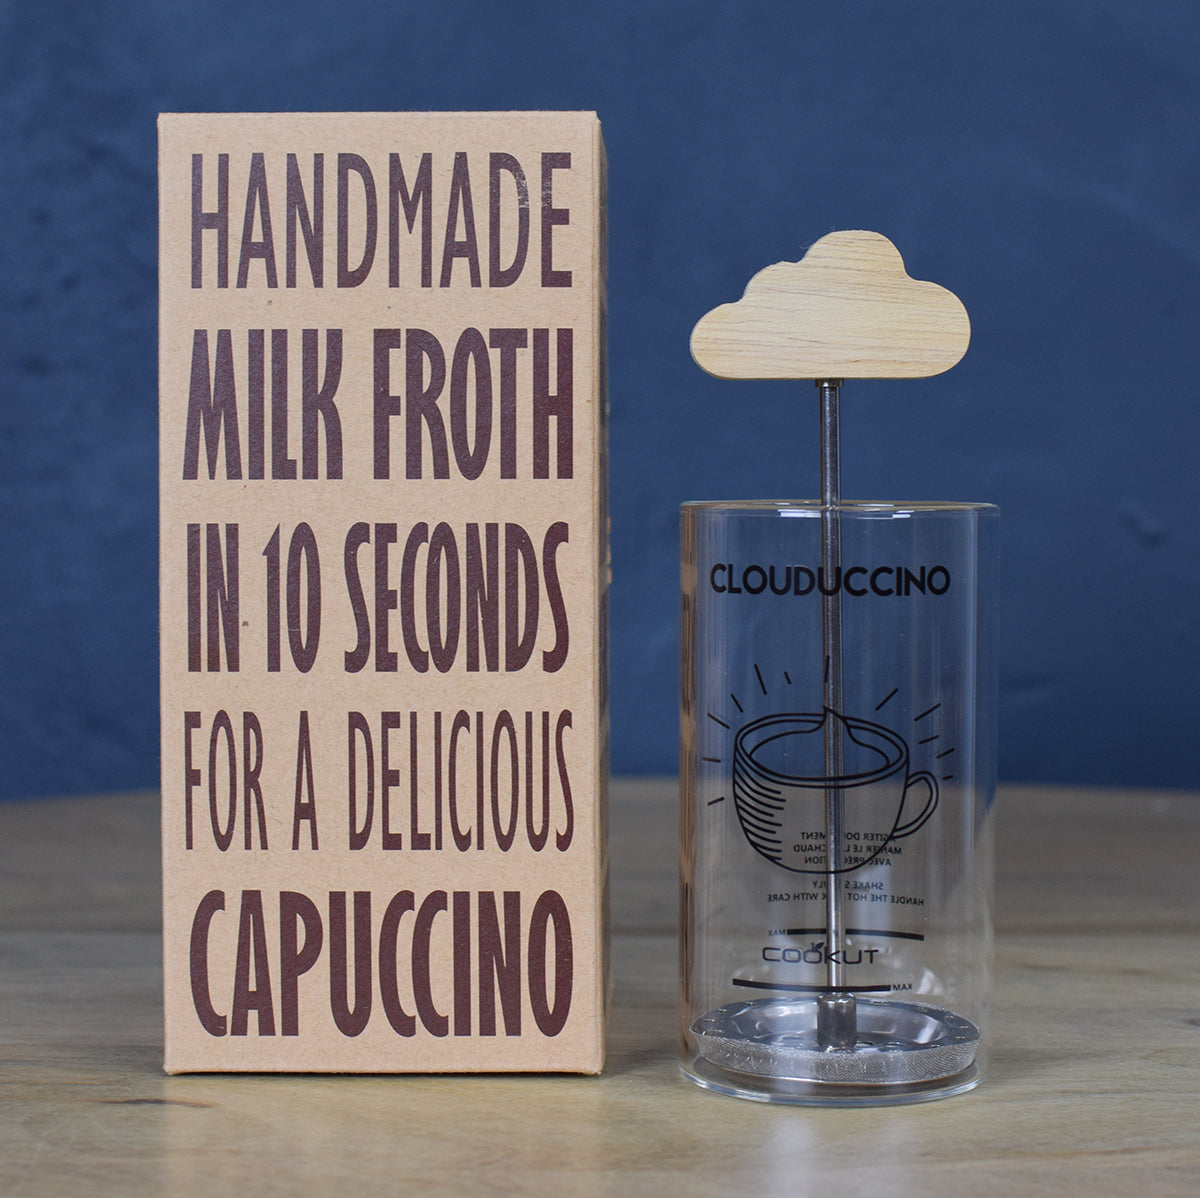 Clouduccino Milk Frother